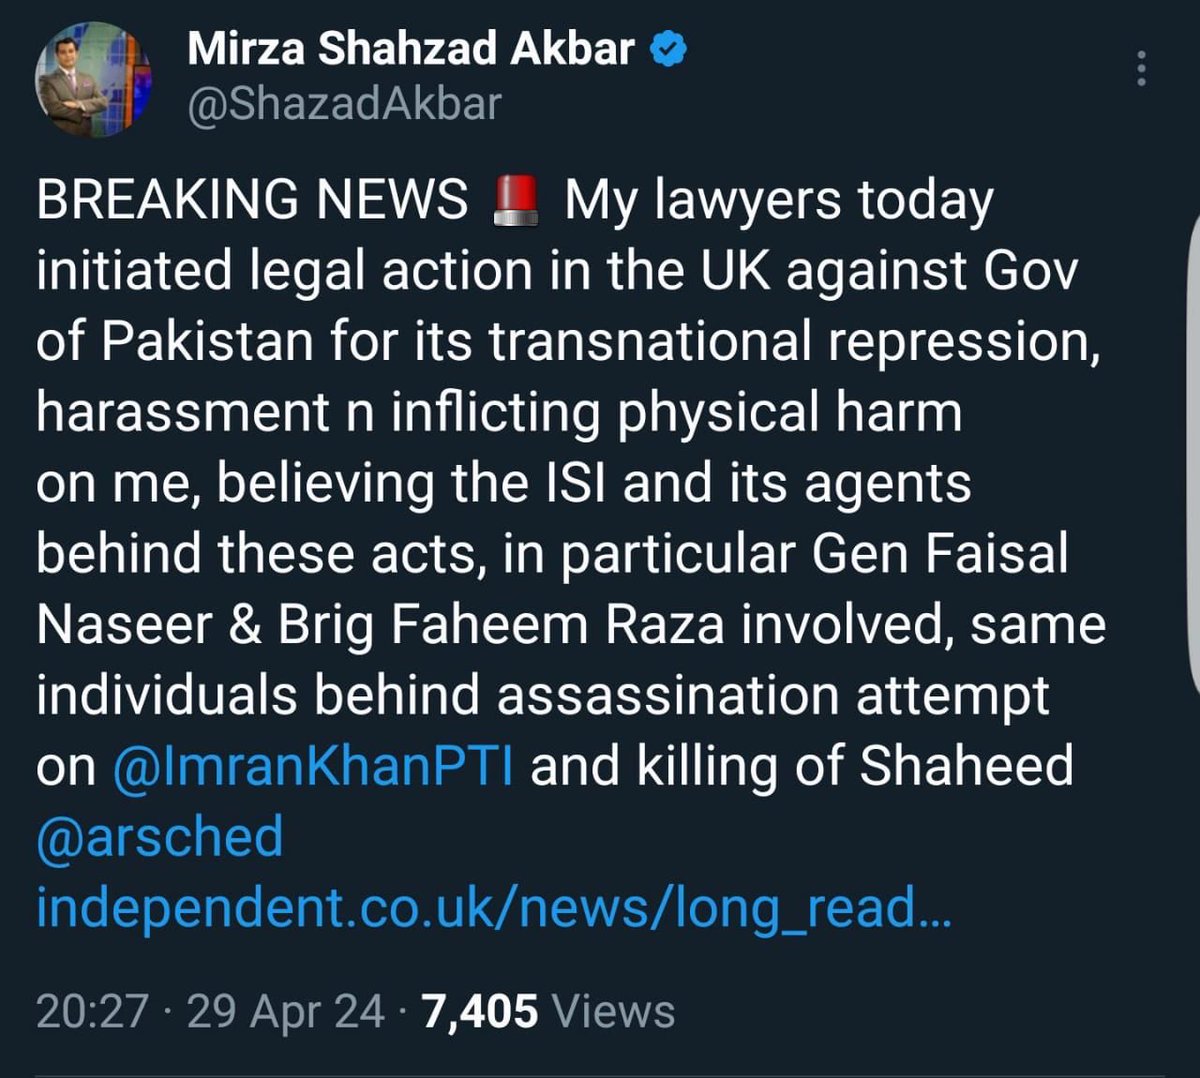 This is important: it is shocking that there are attacks on ⁦@ShazadAkbar⁩ even in England! #calloffthedogs